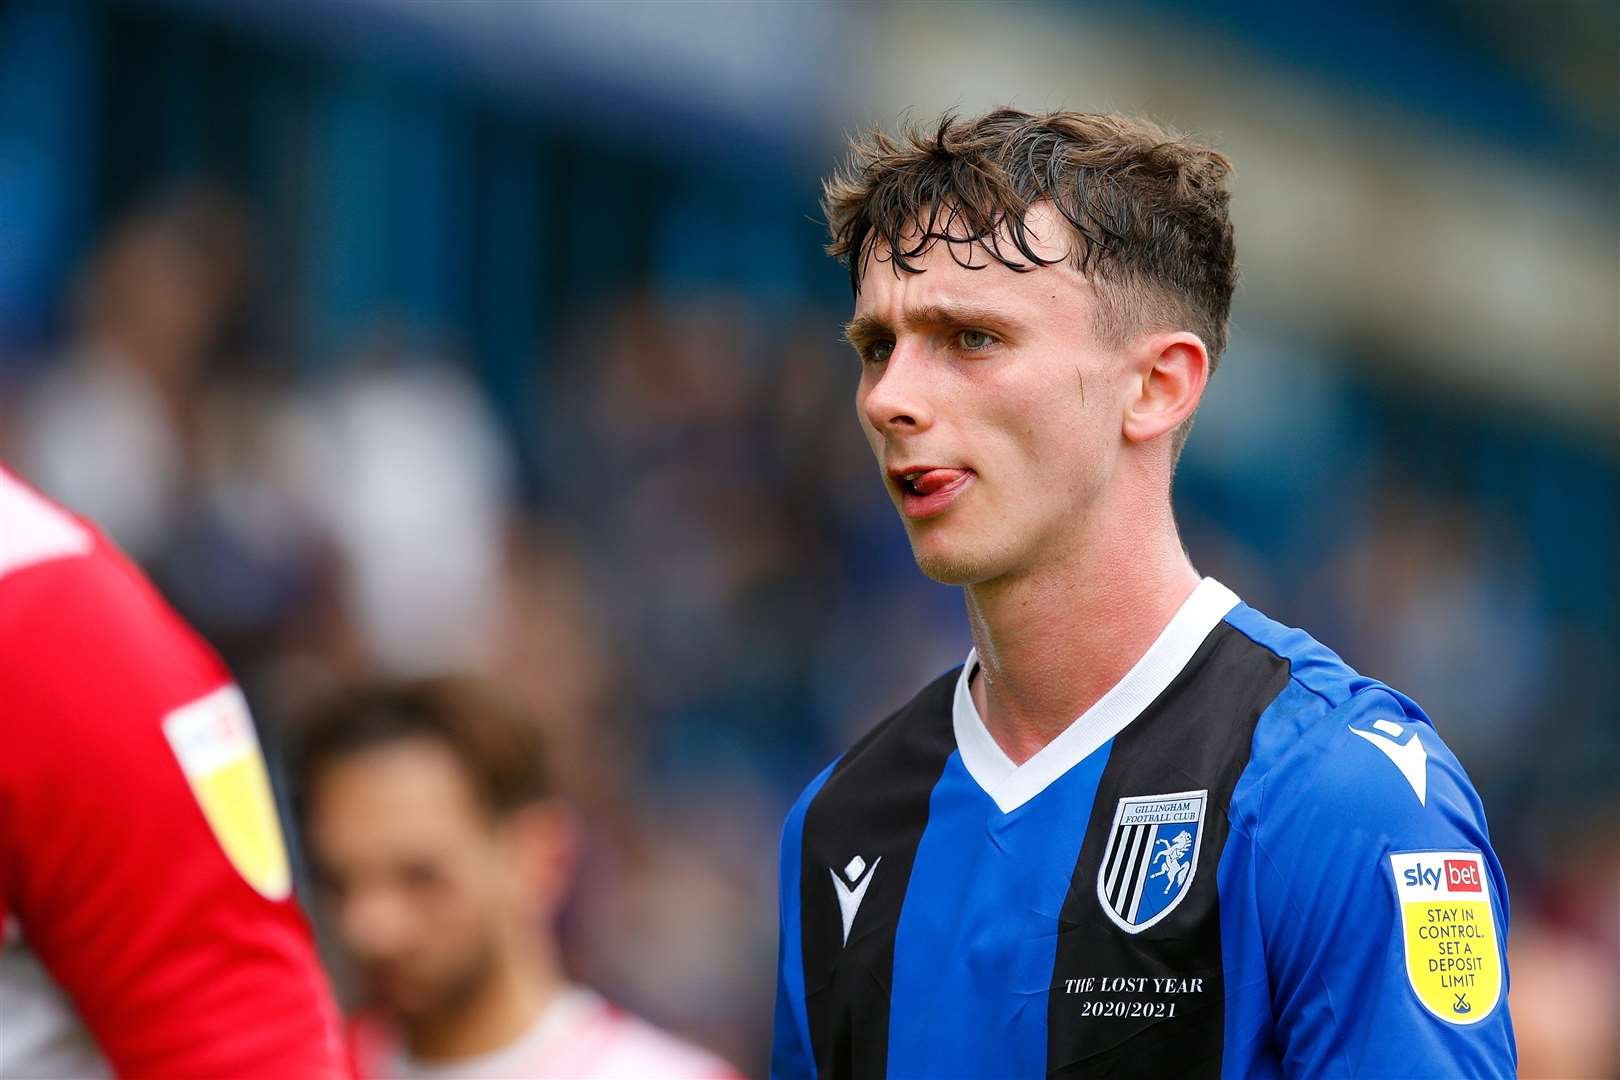 Dan Adshead came off the bench for Gillingham on Saturday after being dropped from the eleven Picture: Andy Jones